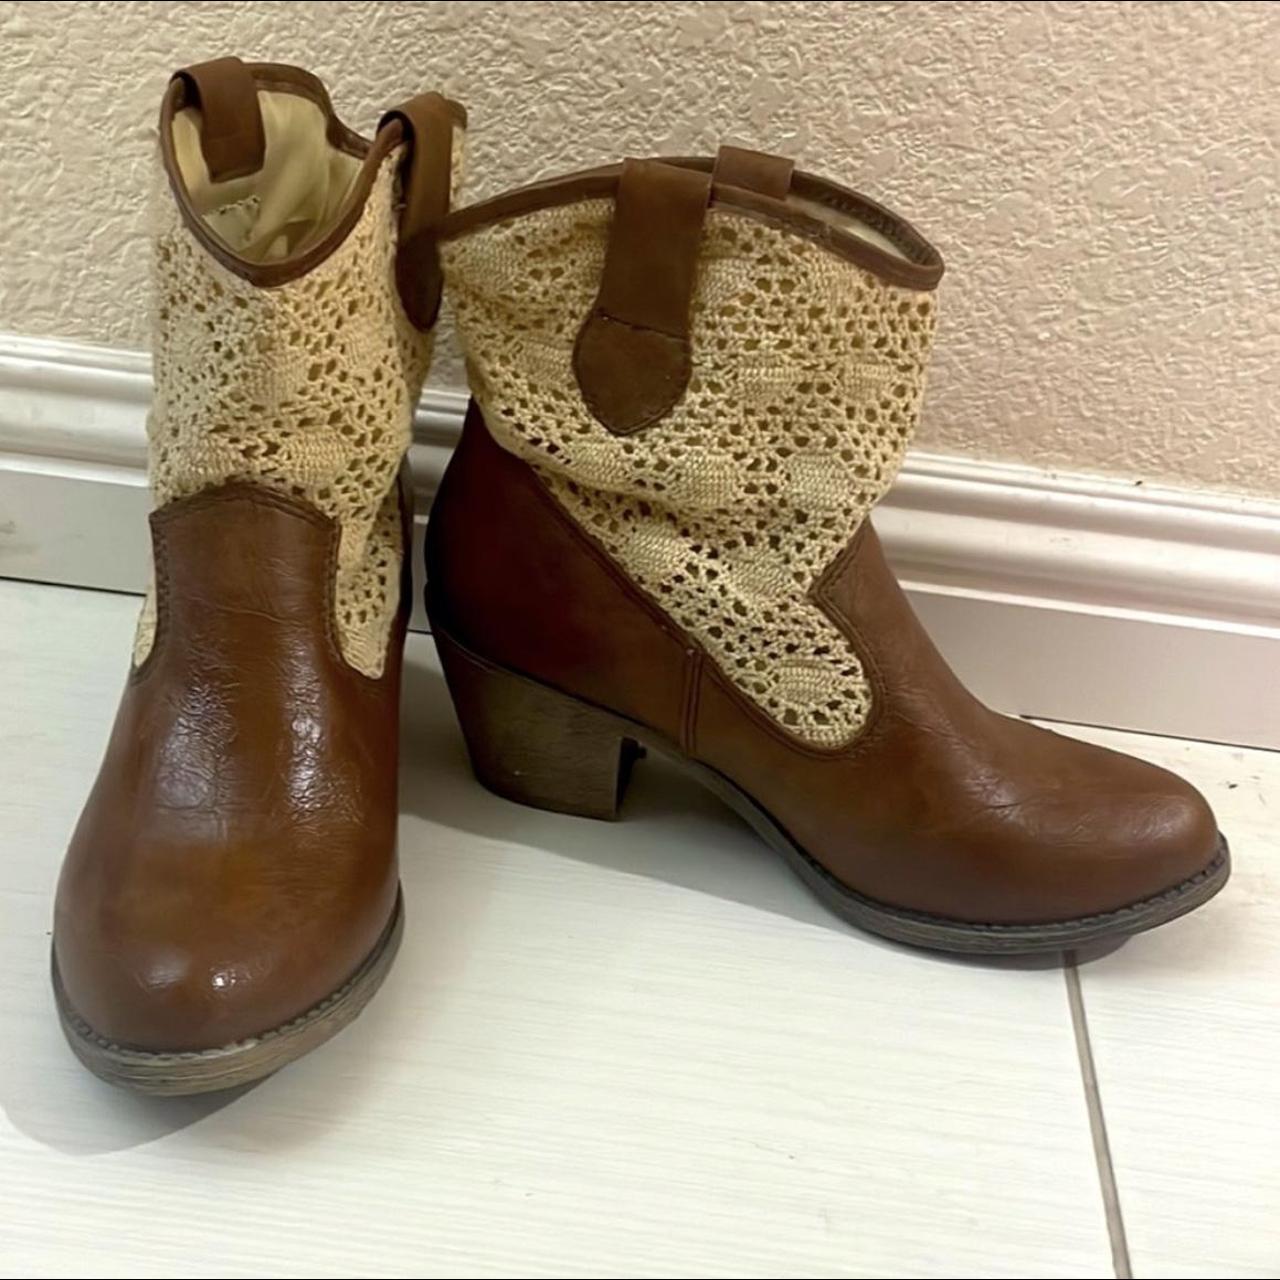 Mudd Clothing Women's Brown and Cream Boots | Depop